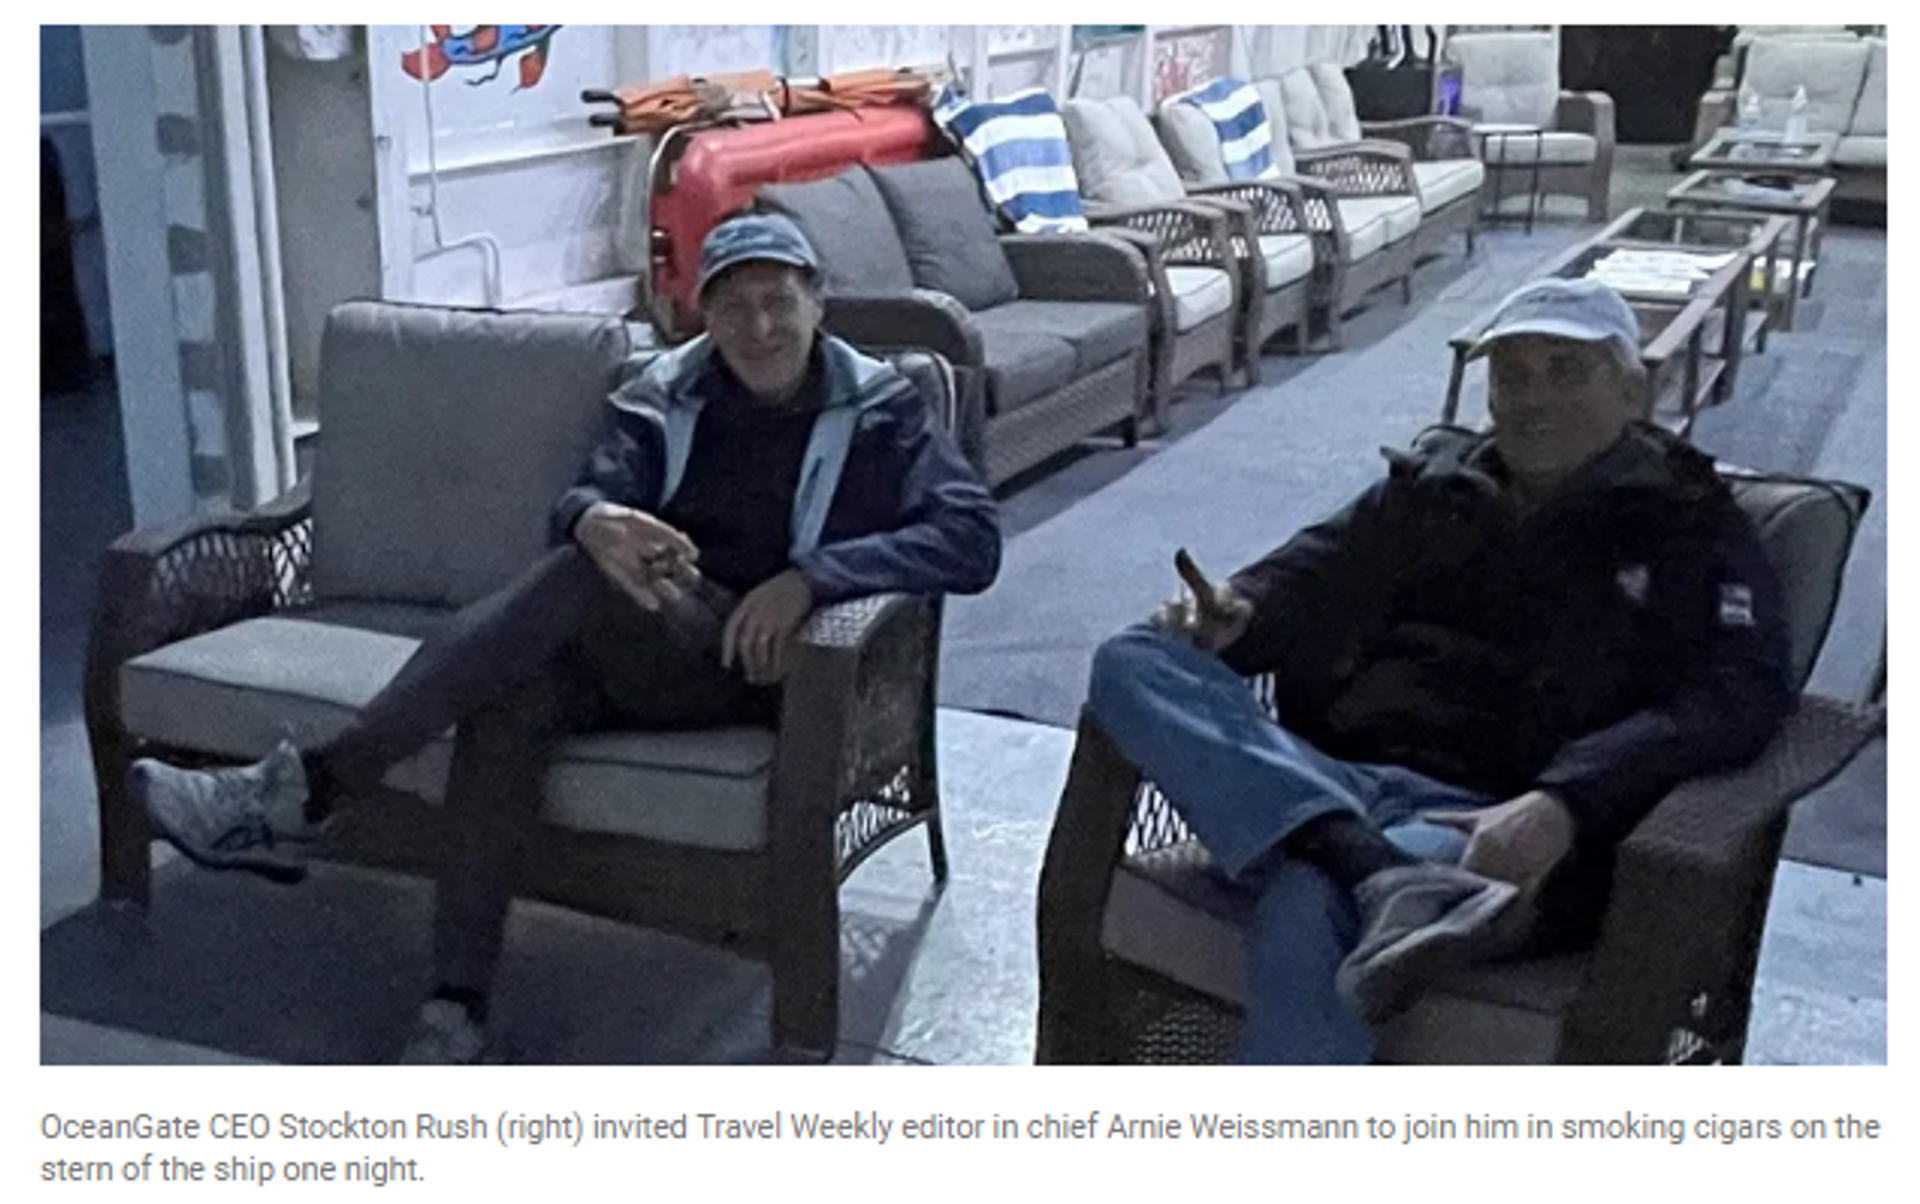 Screengrab from Travel Weekly showing OceanGate Expeditions CEO Stockton Rush and Travel Weekly editor in chief Arnie Weissmann. - Sputnik International, 1920, 01.07.2023